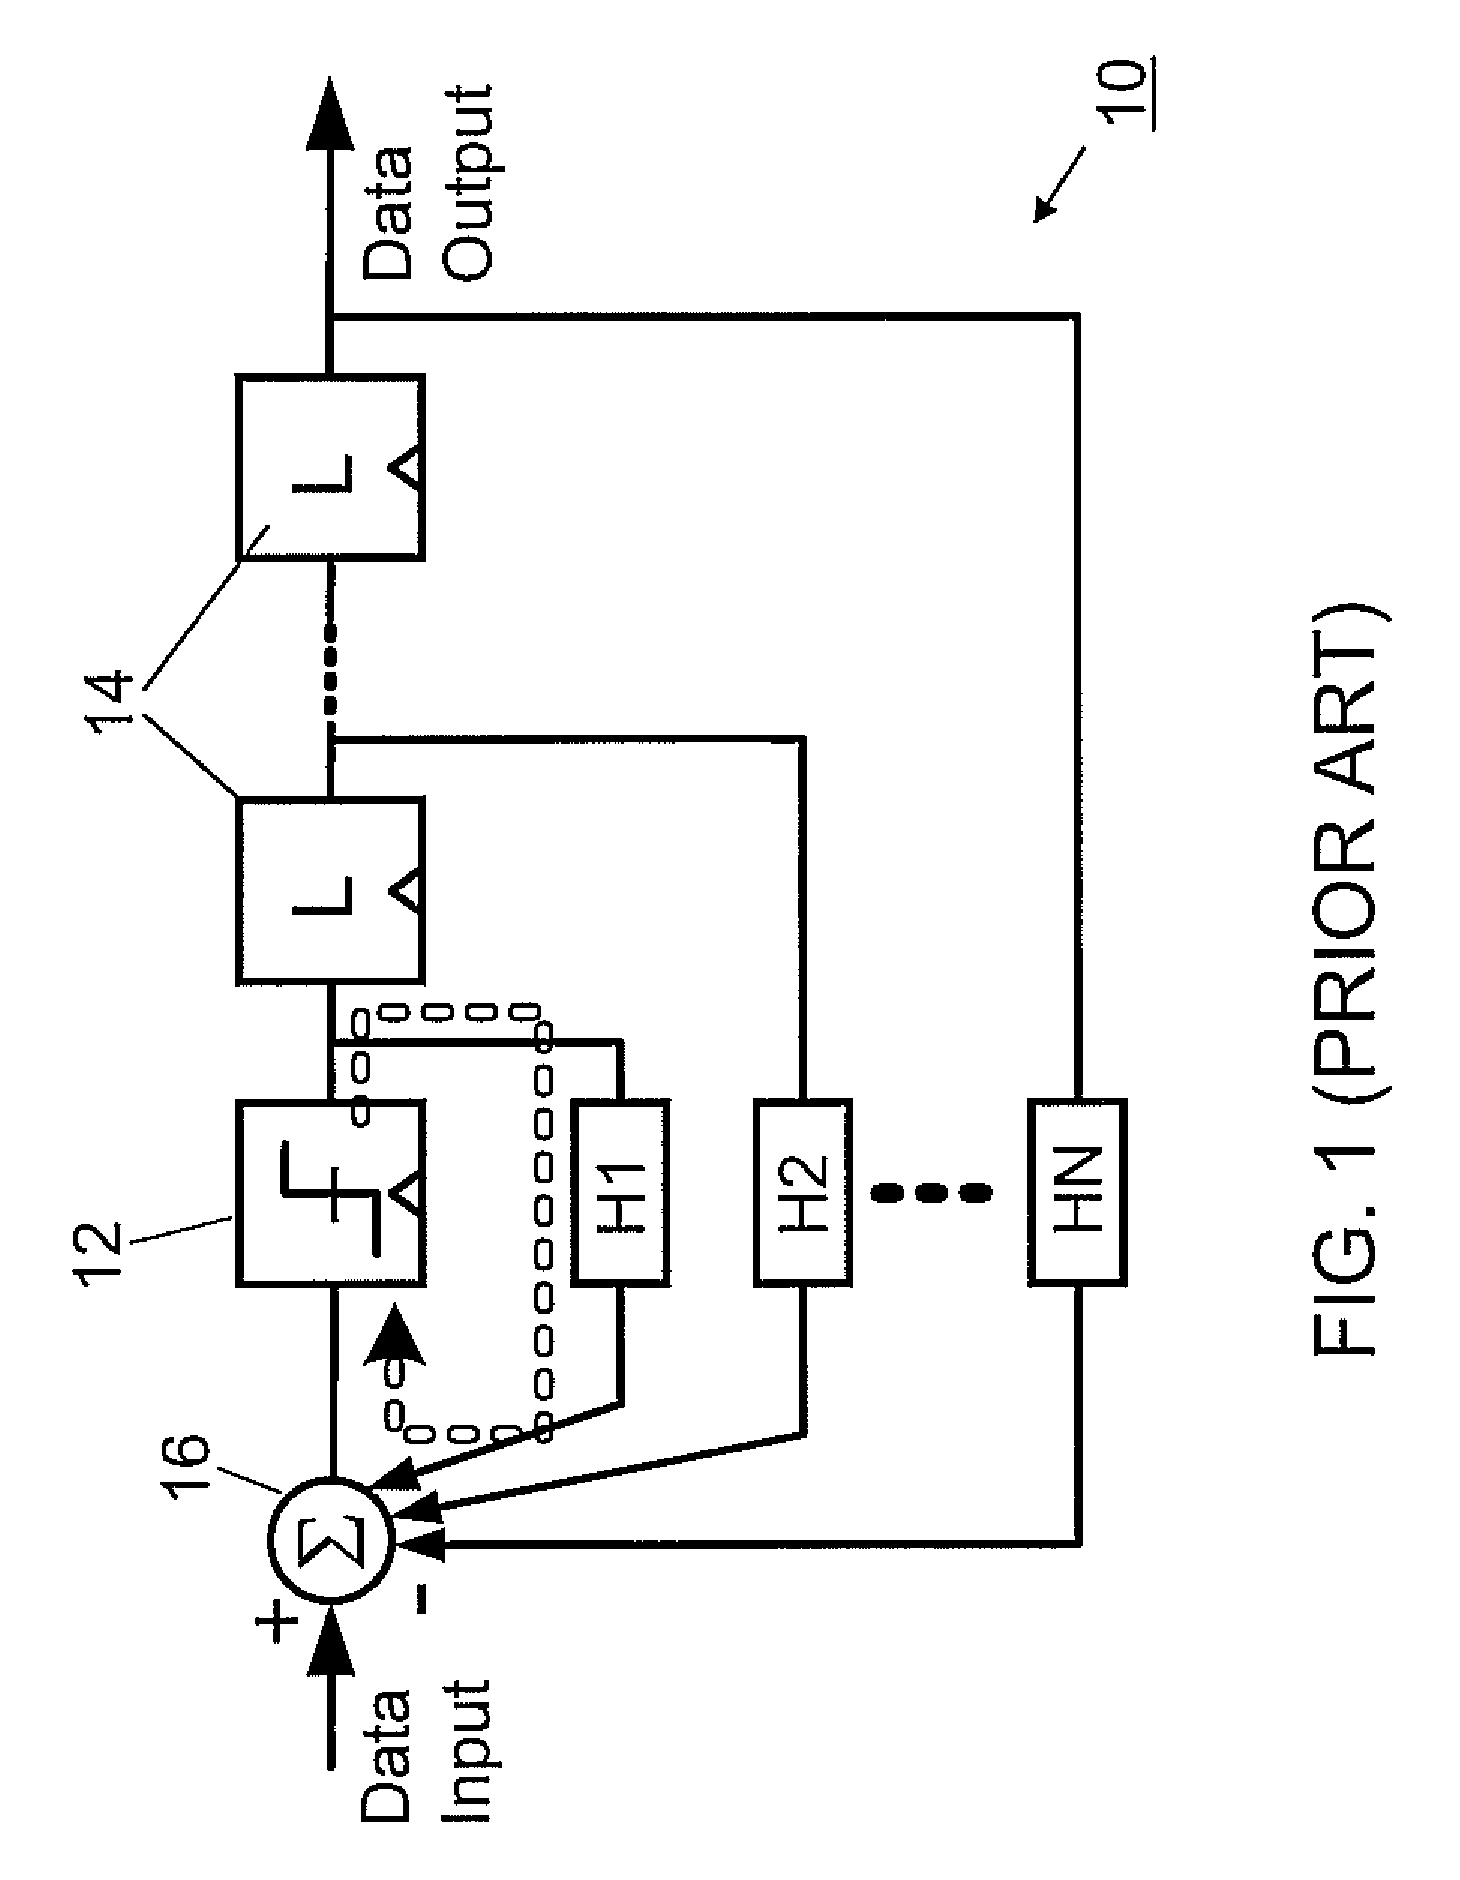 Circuits and methods for dfe with reduced area and power consumption